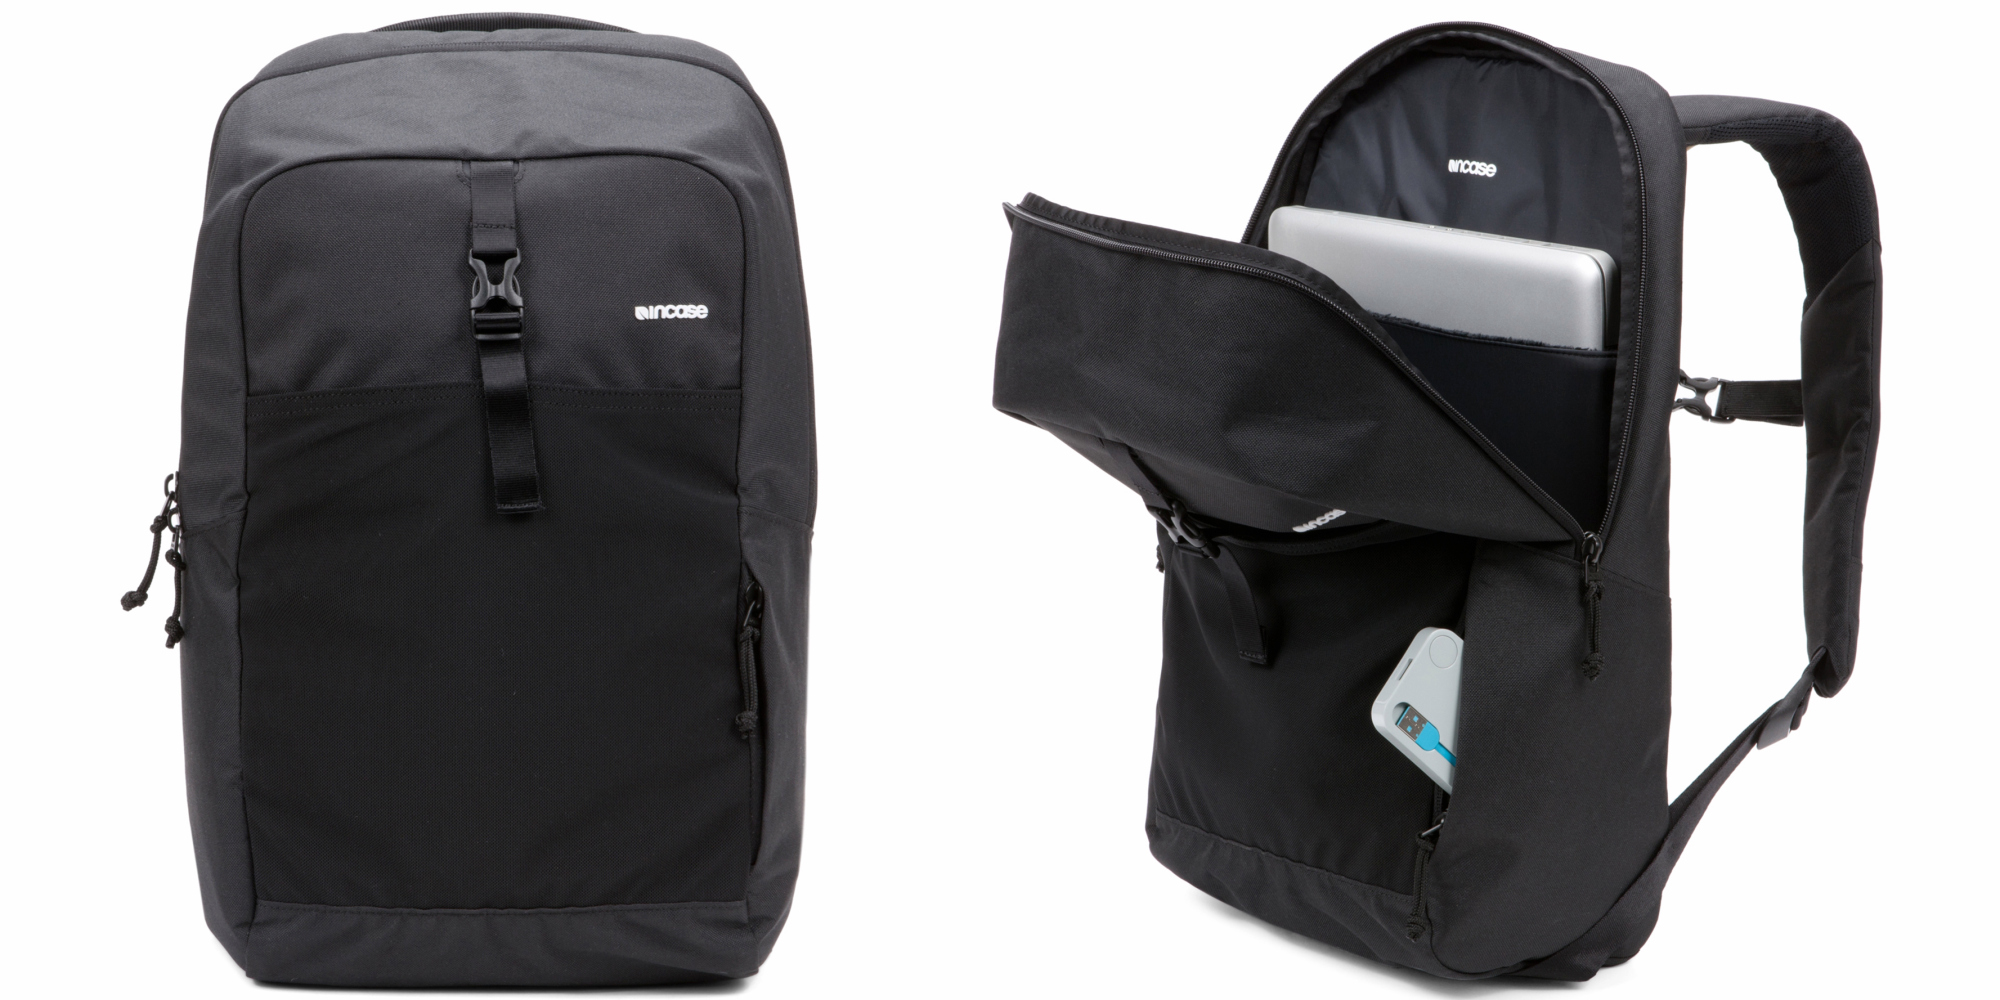 9to5Toys Last Call: Twelve South iPad cases $35, Incase backpack $30